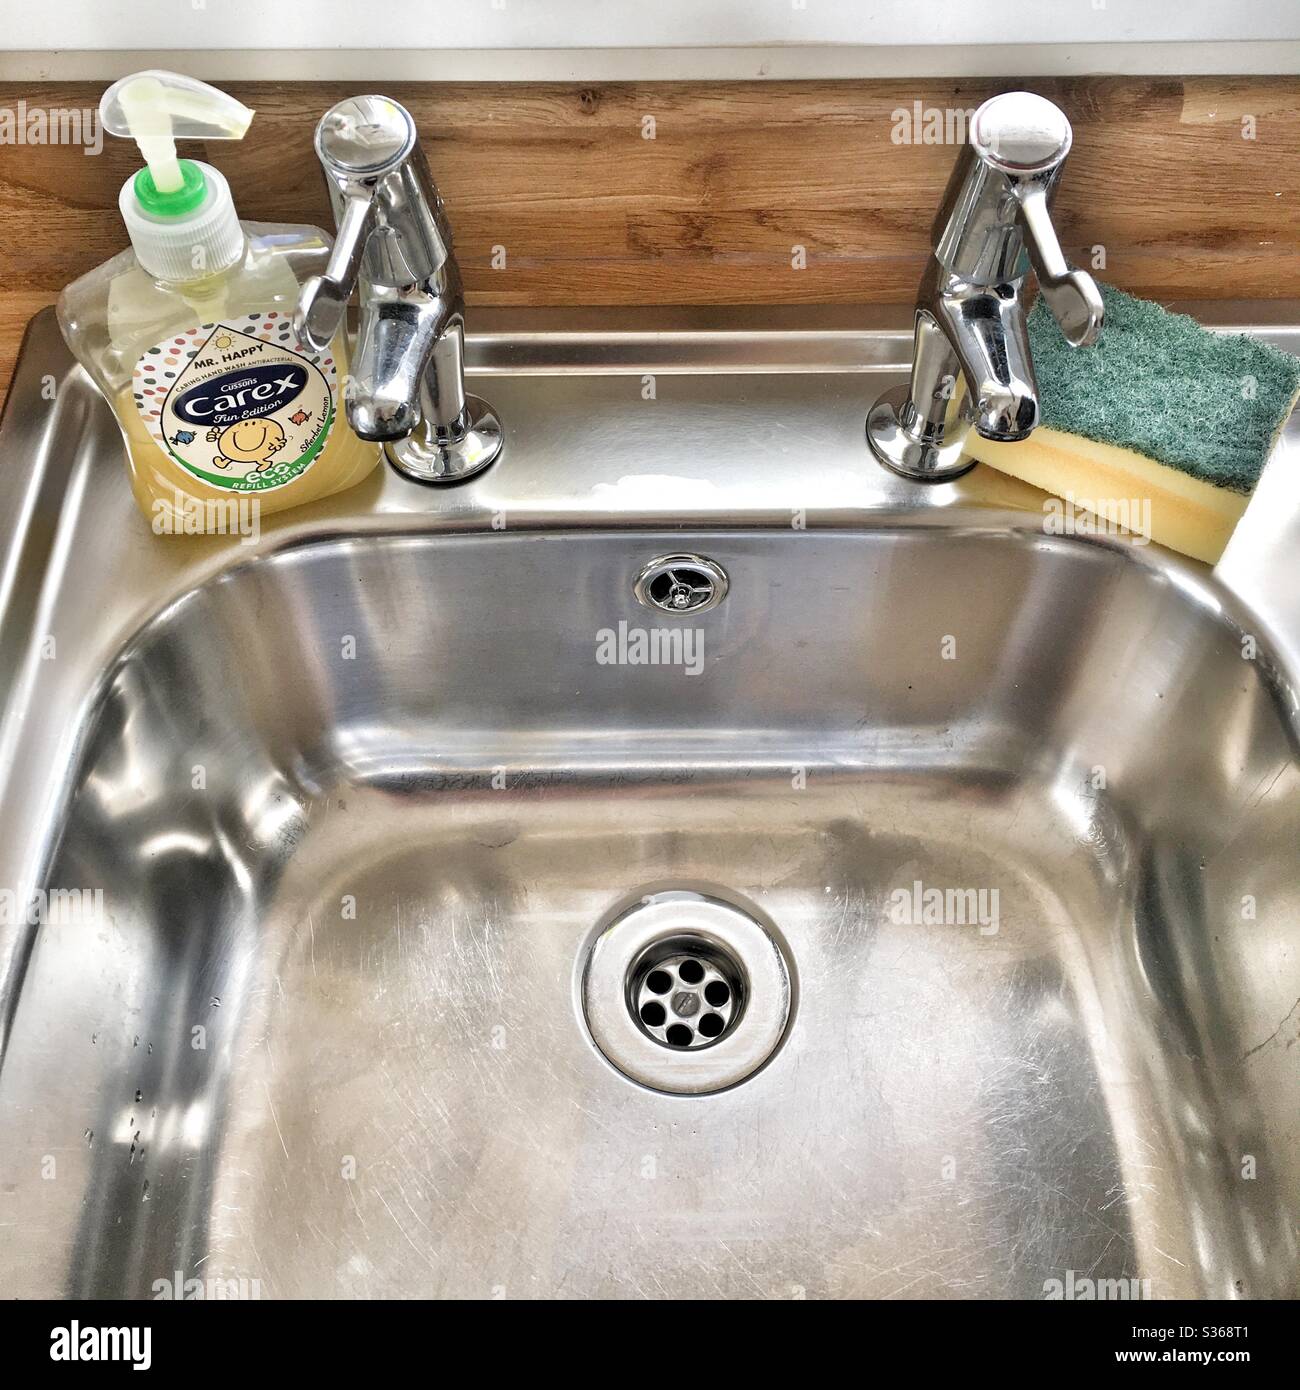 A photograph of a spotlessly clean stainless steel sink and taps with a bottle of Carex hand soap and a sponge. Cleaning, clean home, ocd, washing hands concept. Stock Photo